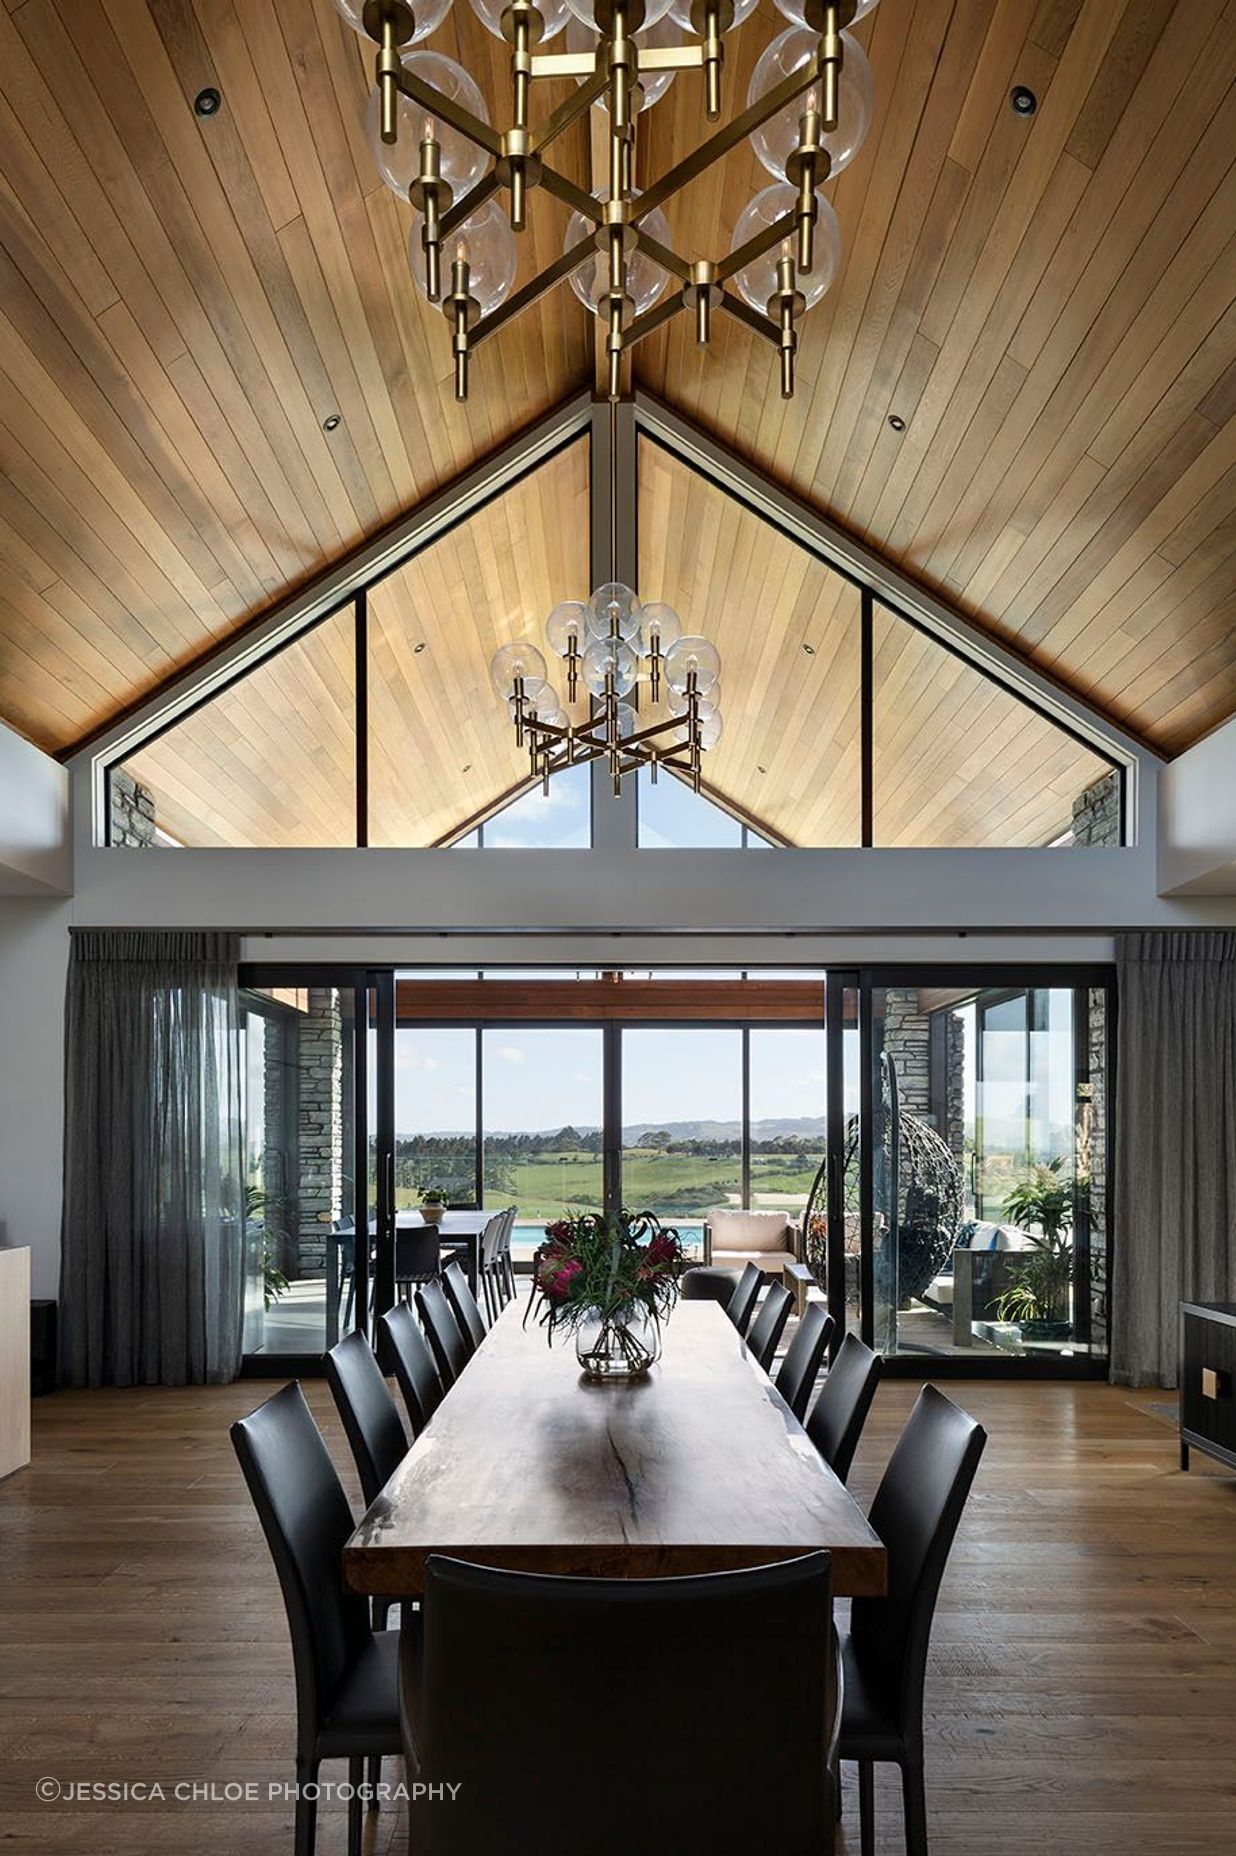 Formal dining under a warm vaulted ceiling